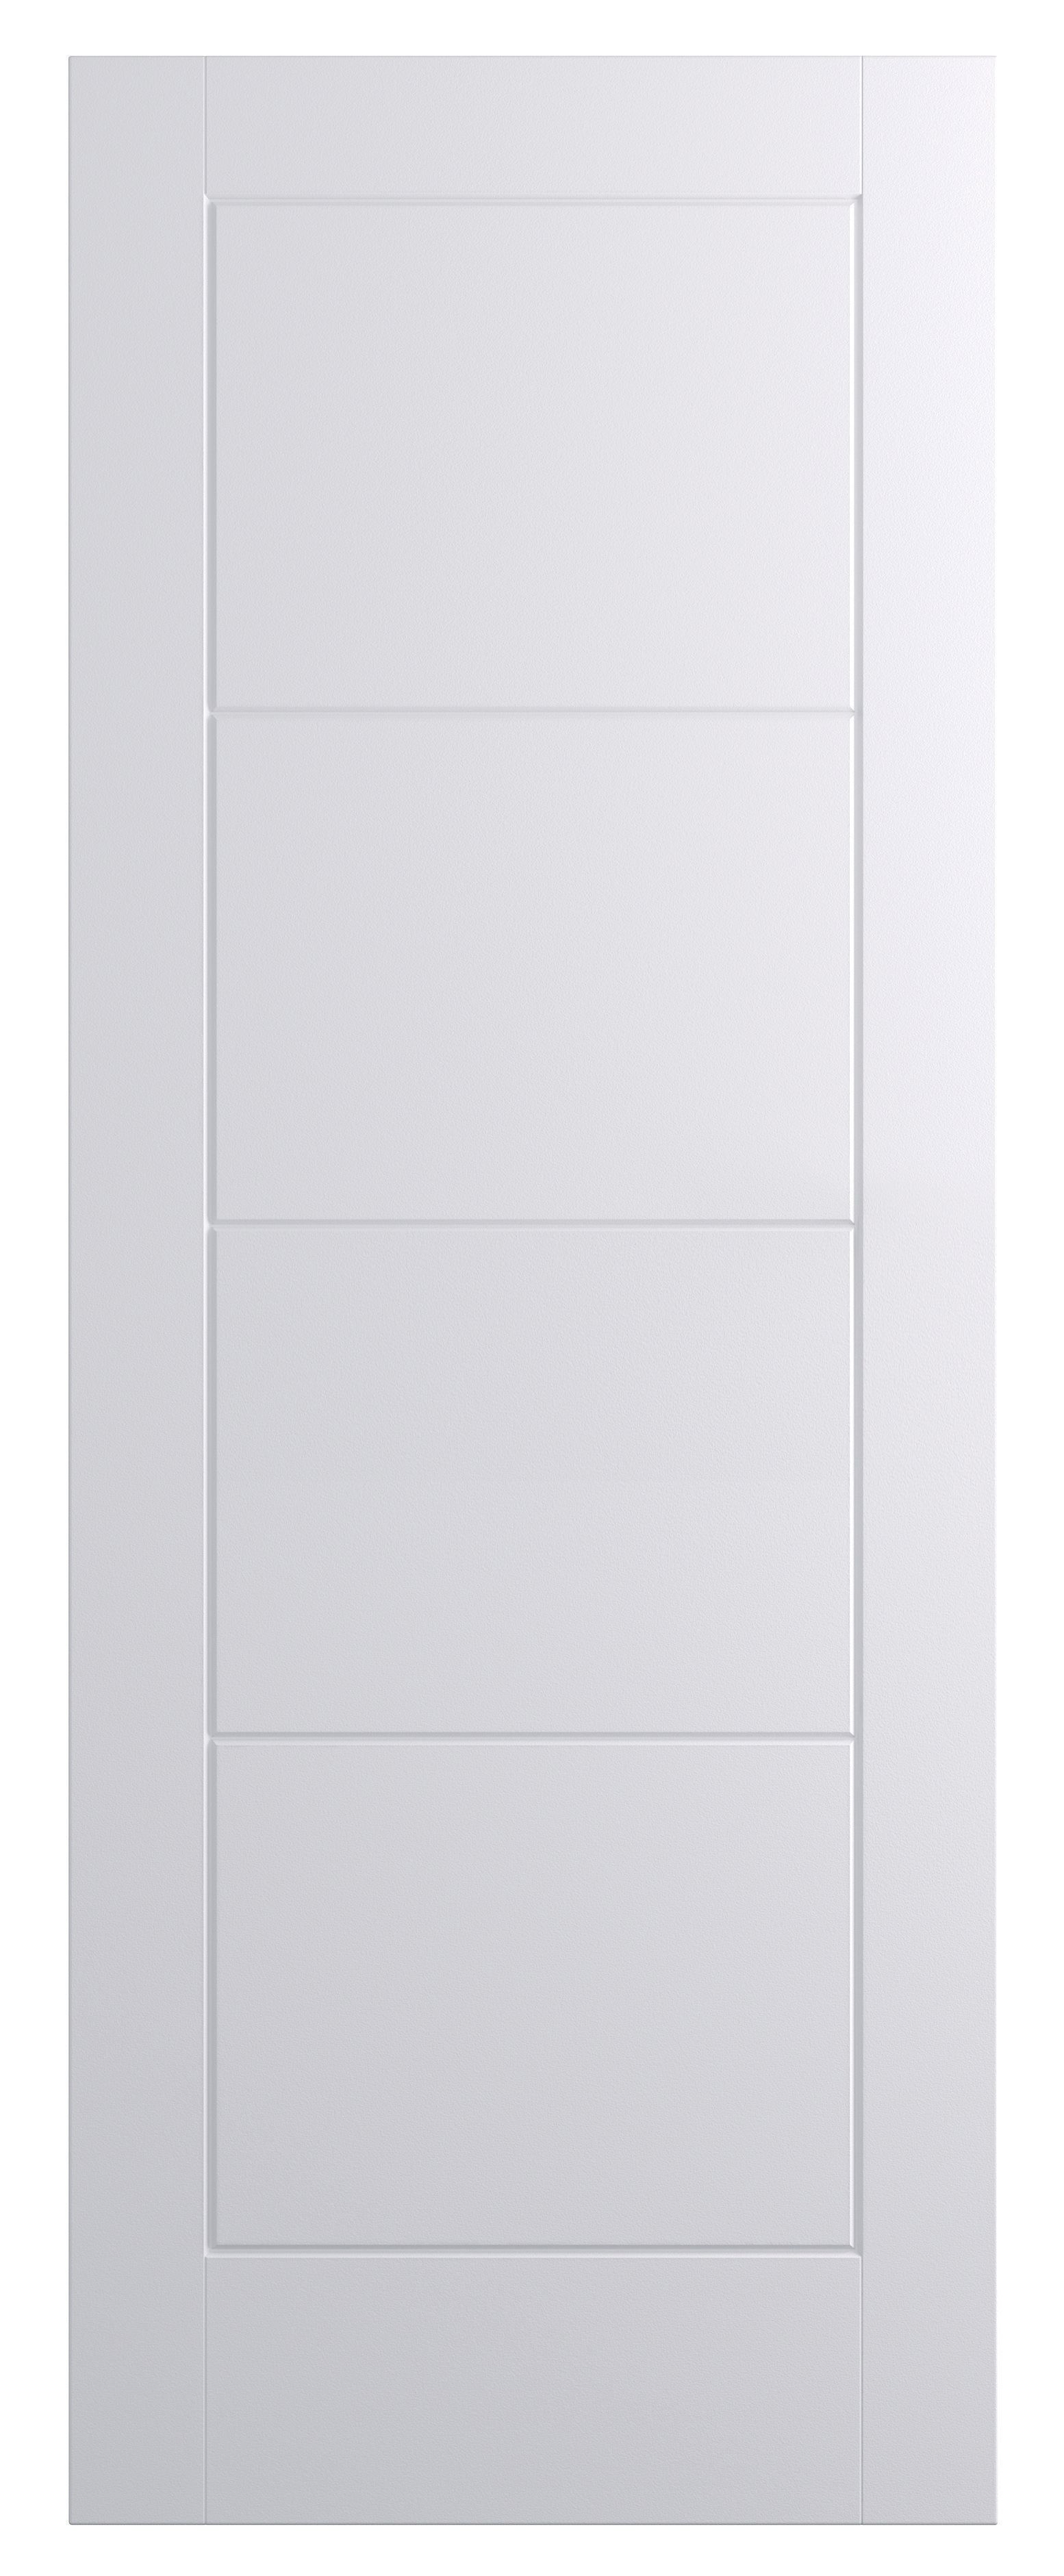 Image of Wickes Exeter White Smooth Moulded 4 Panel Internal Door - 1981 x 610mm